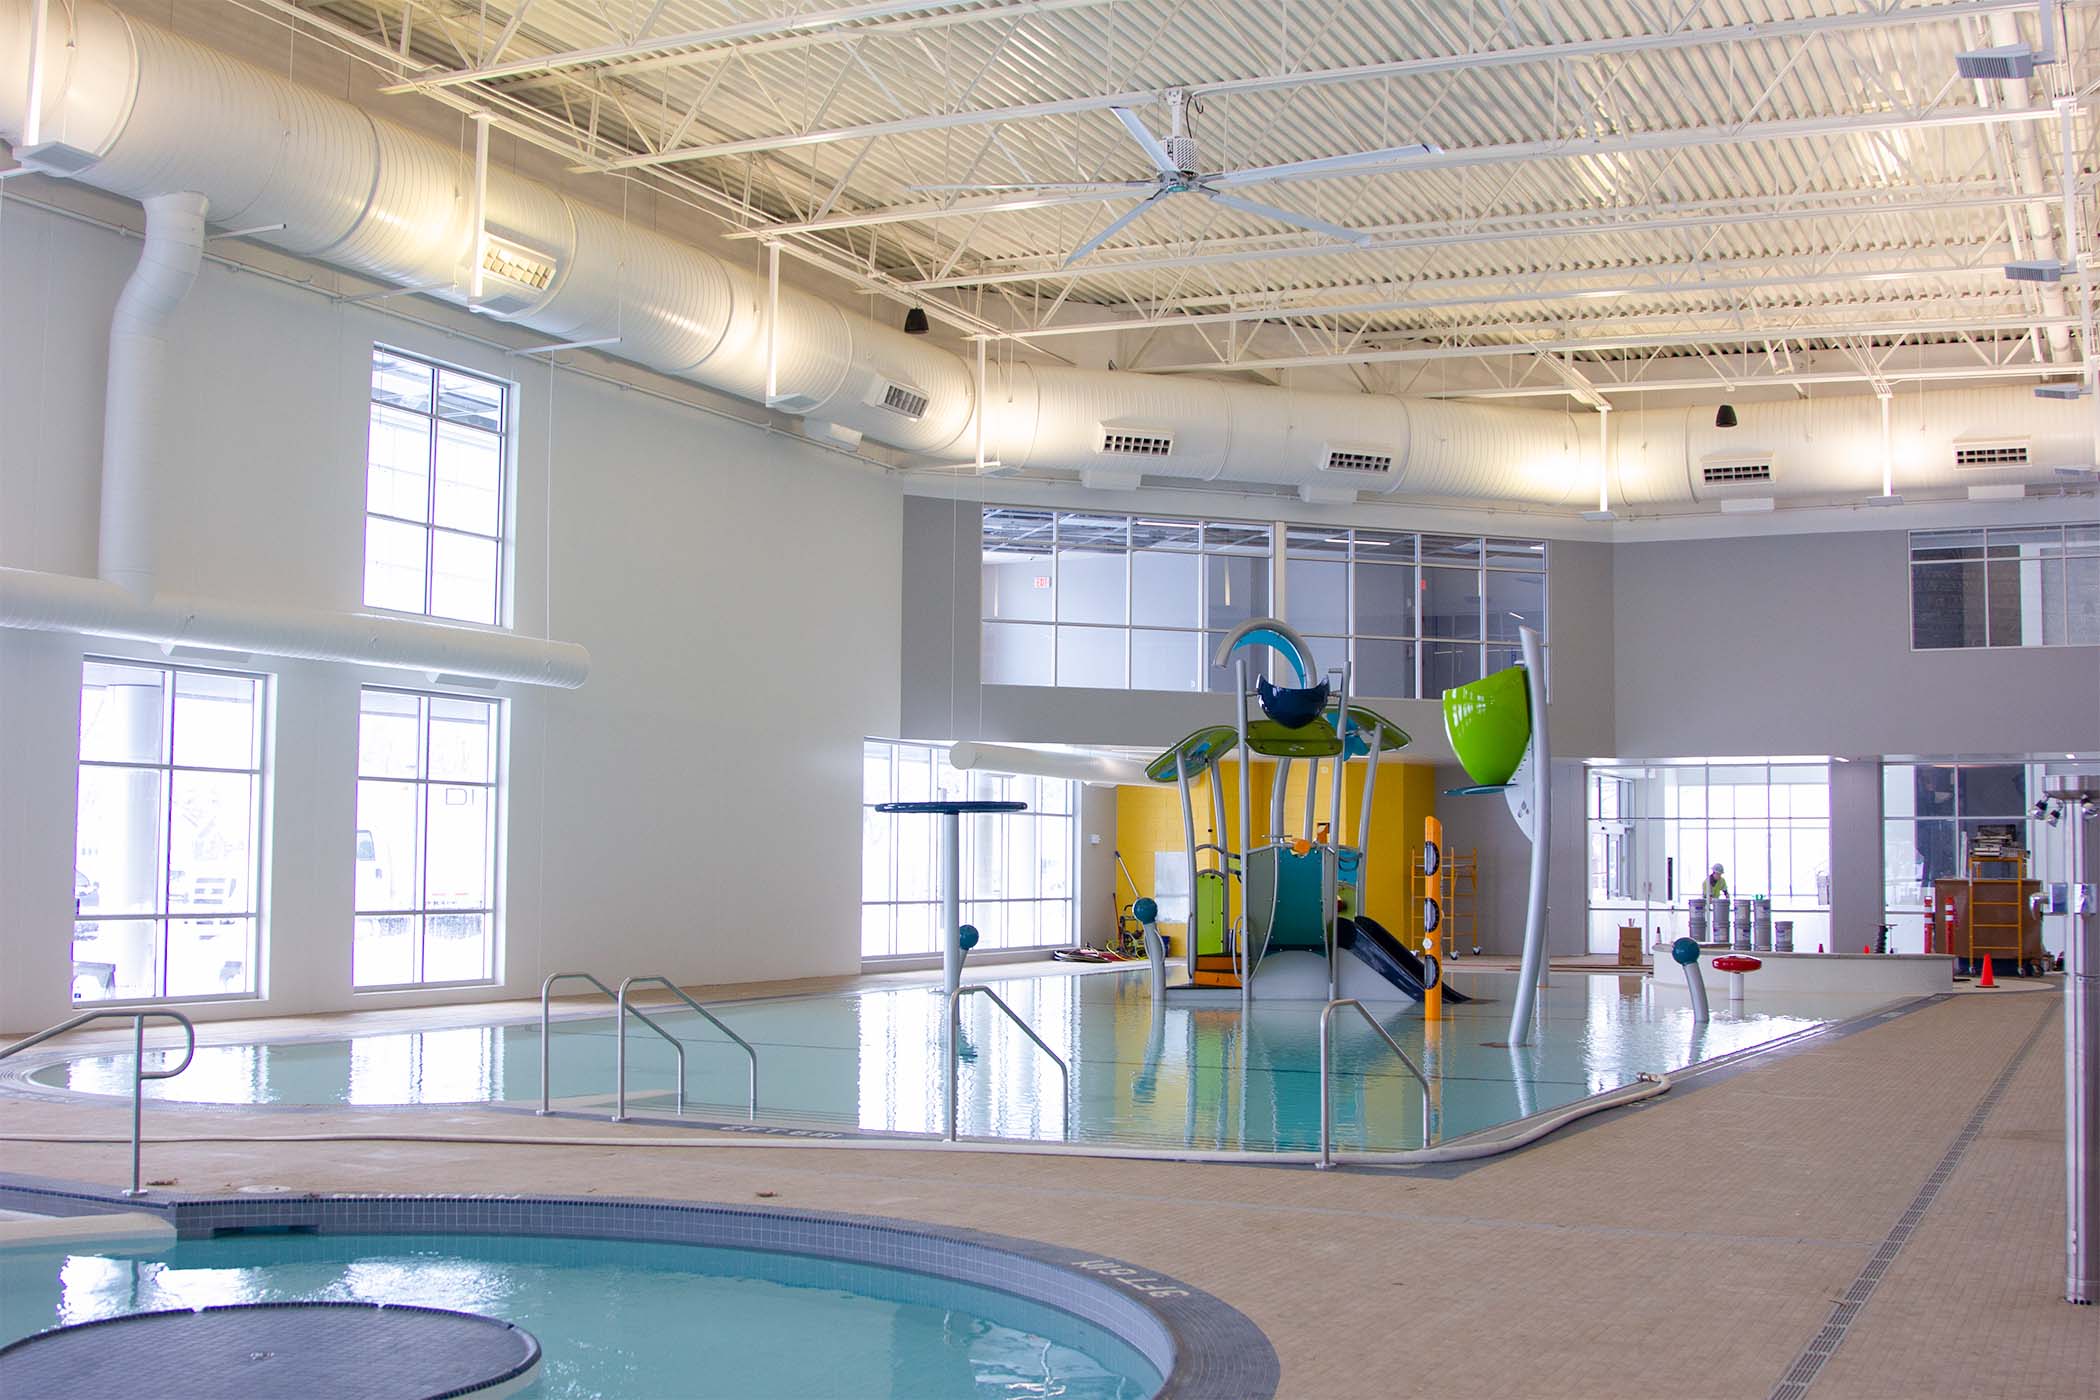 Holland Aquatic Center project includes sustainability measures